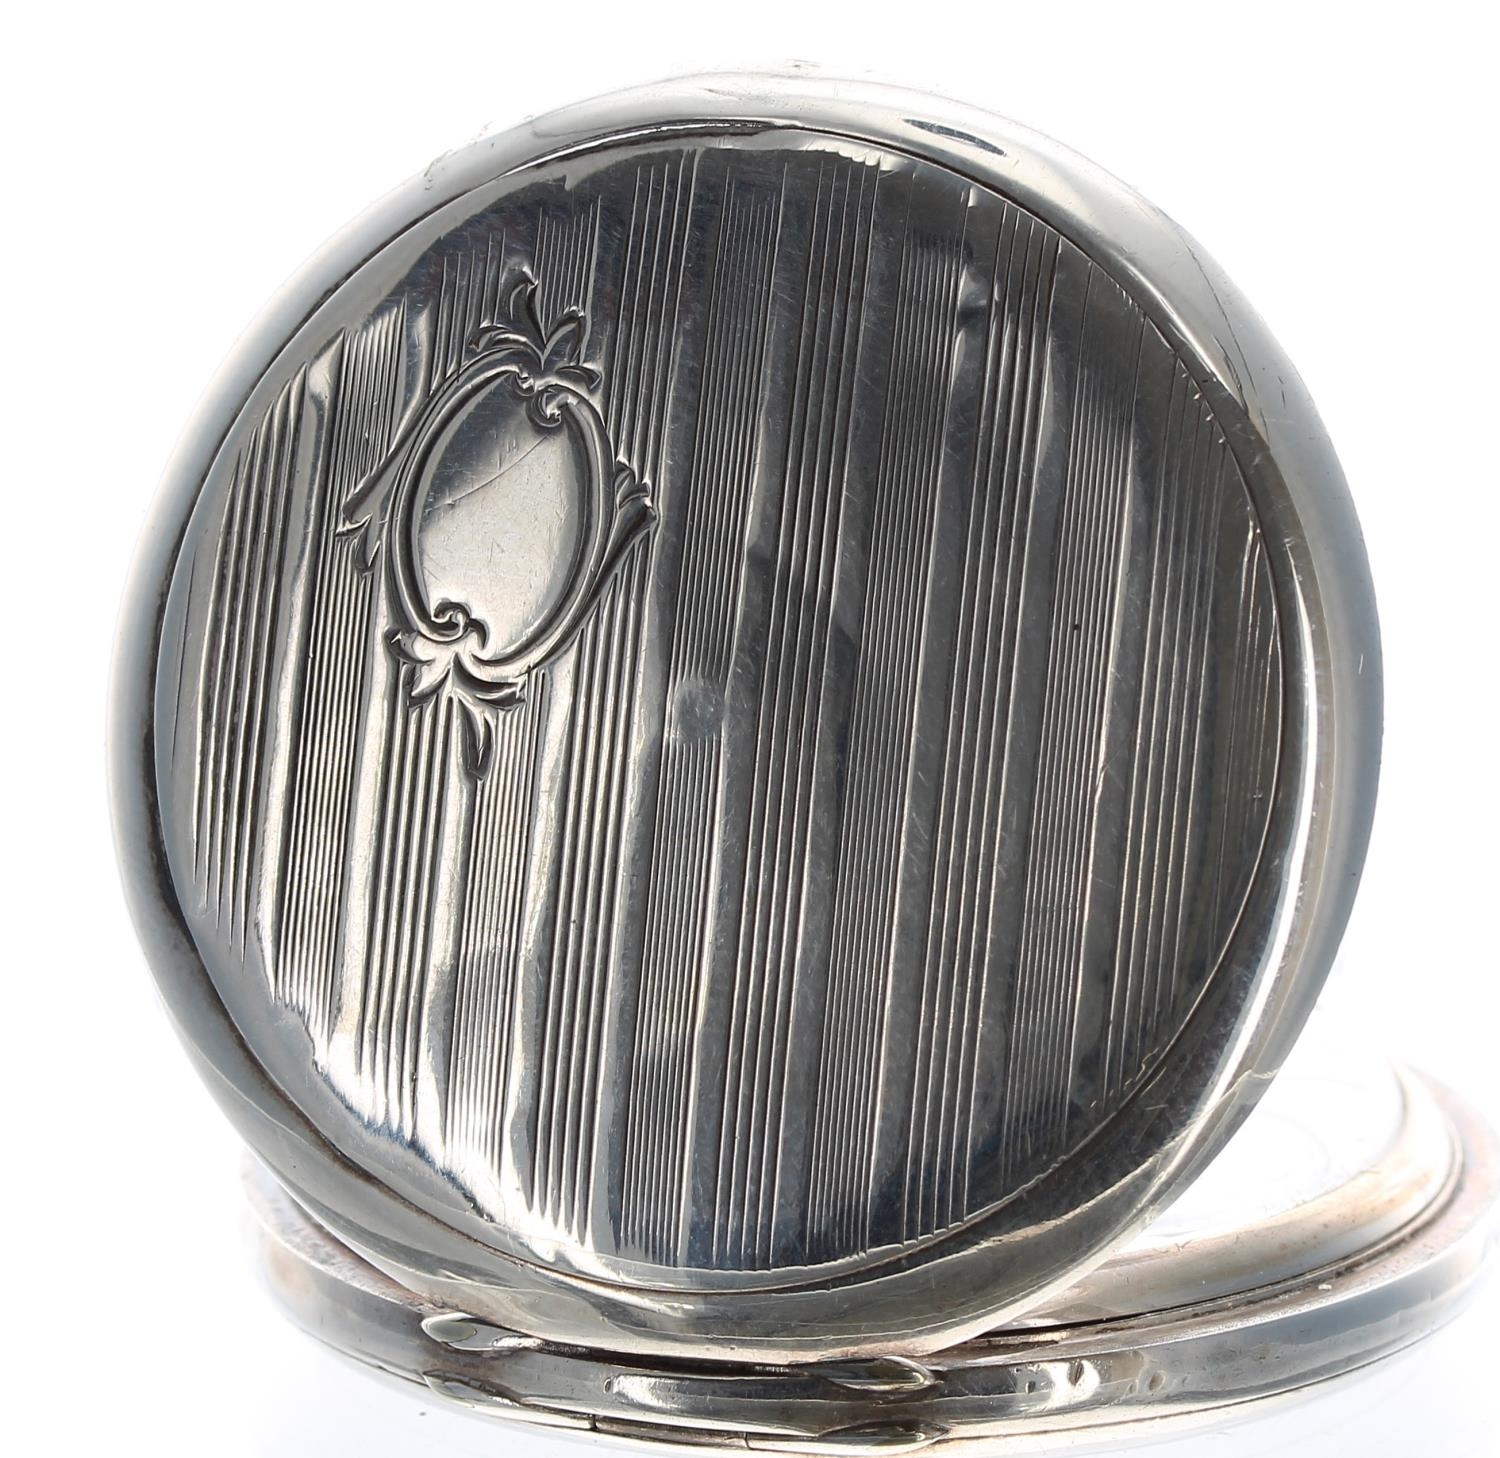 Unic silver (0.900) lever hunter pocket watch, signed movement with compensated balance and - Image 3 of 4